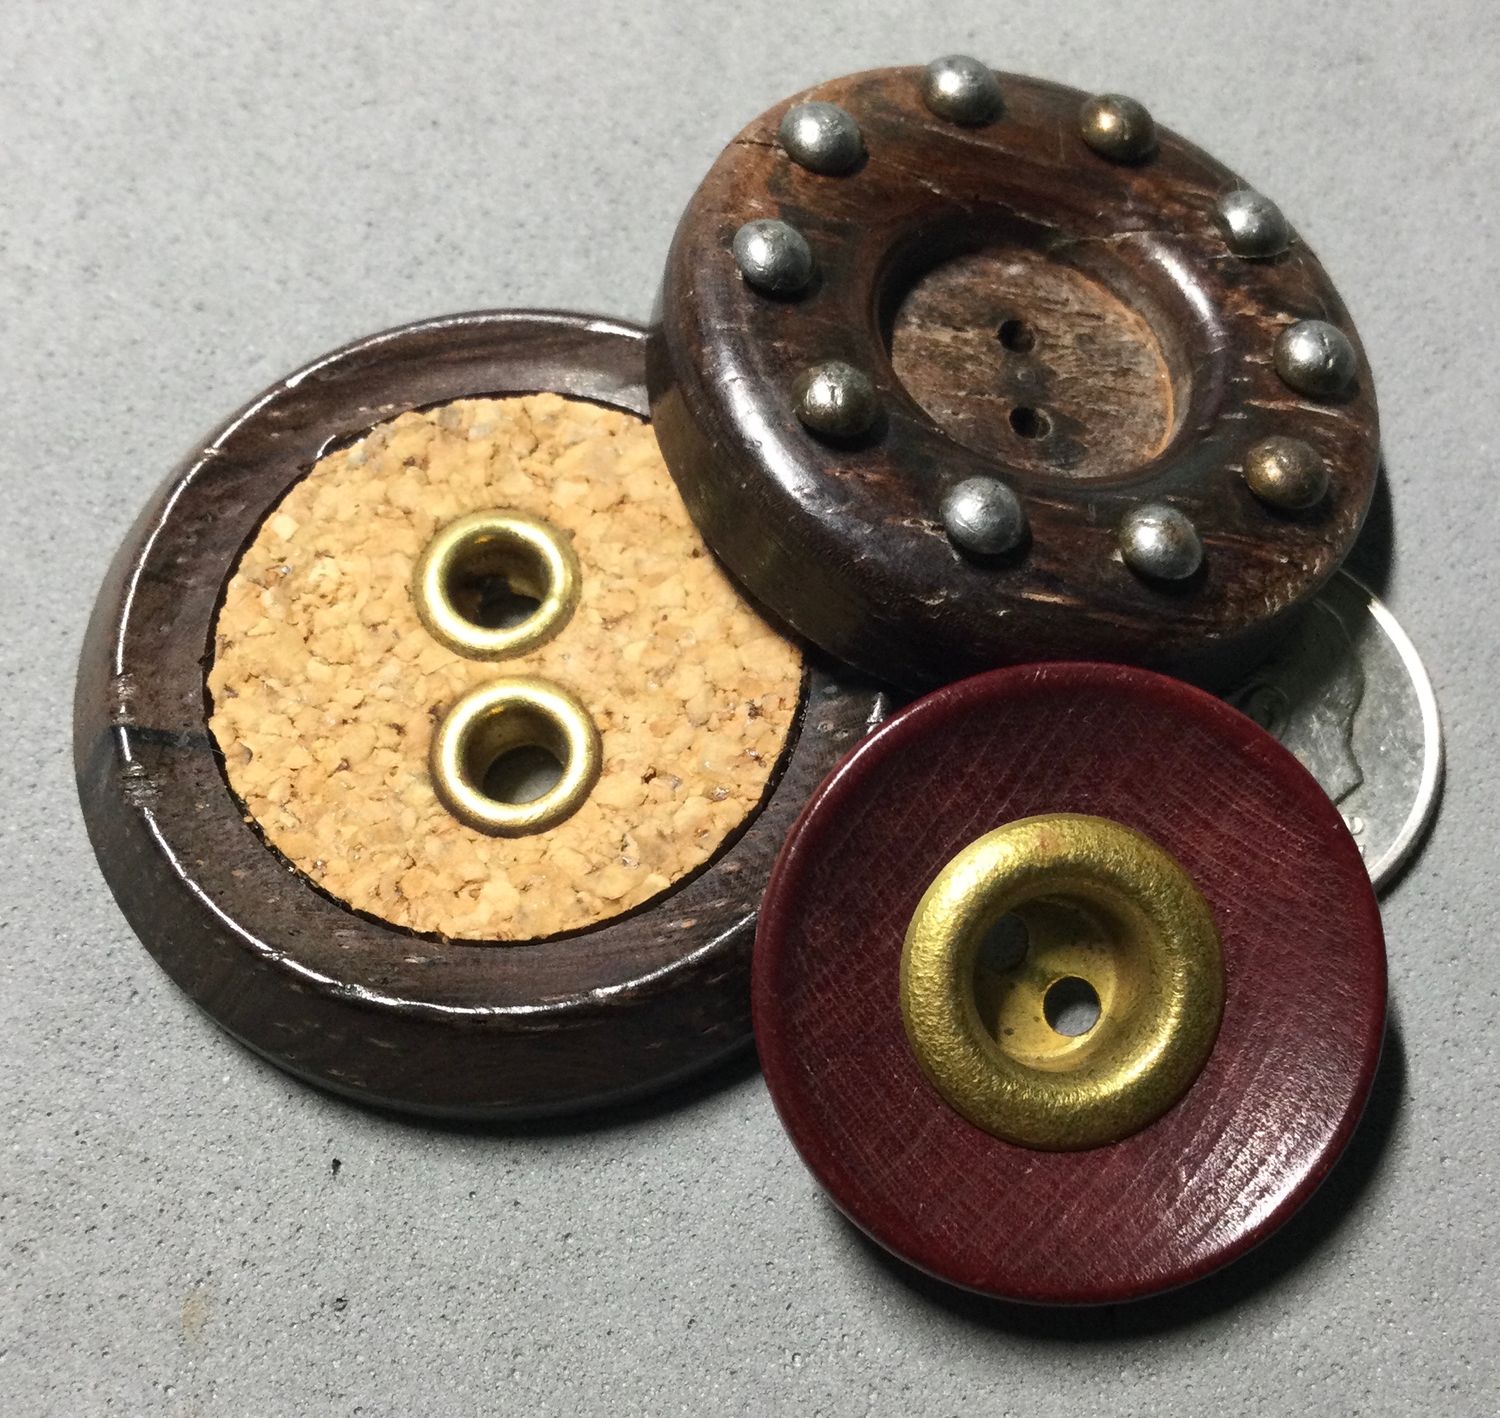 THREE WOOD BUTTONS